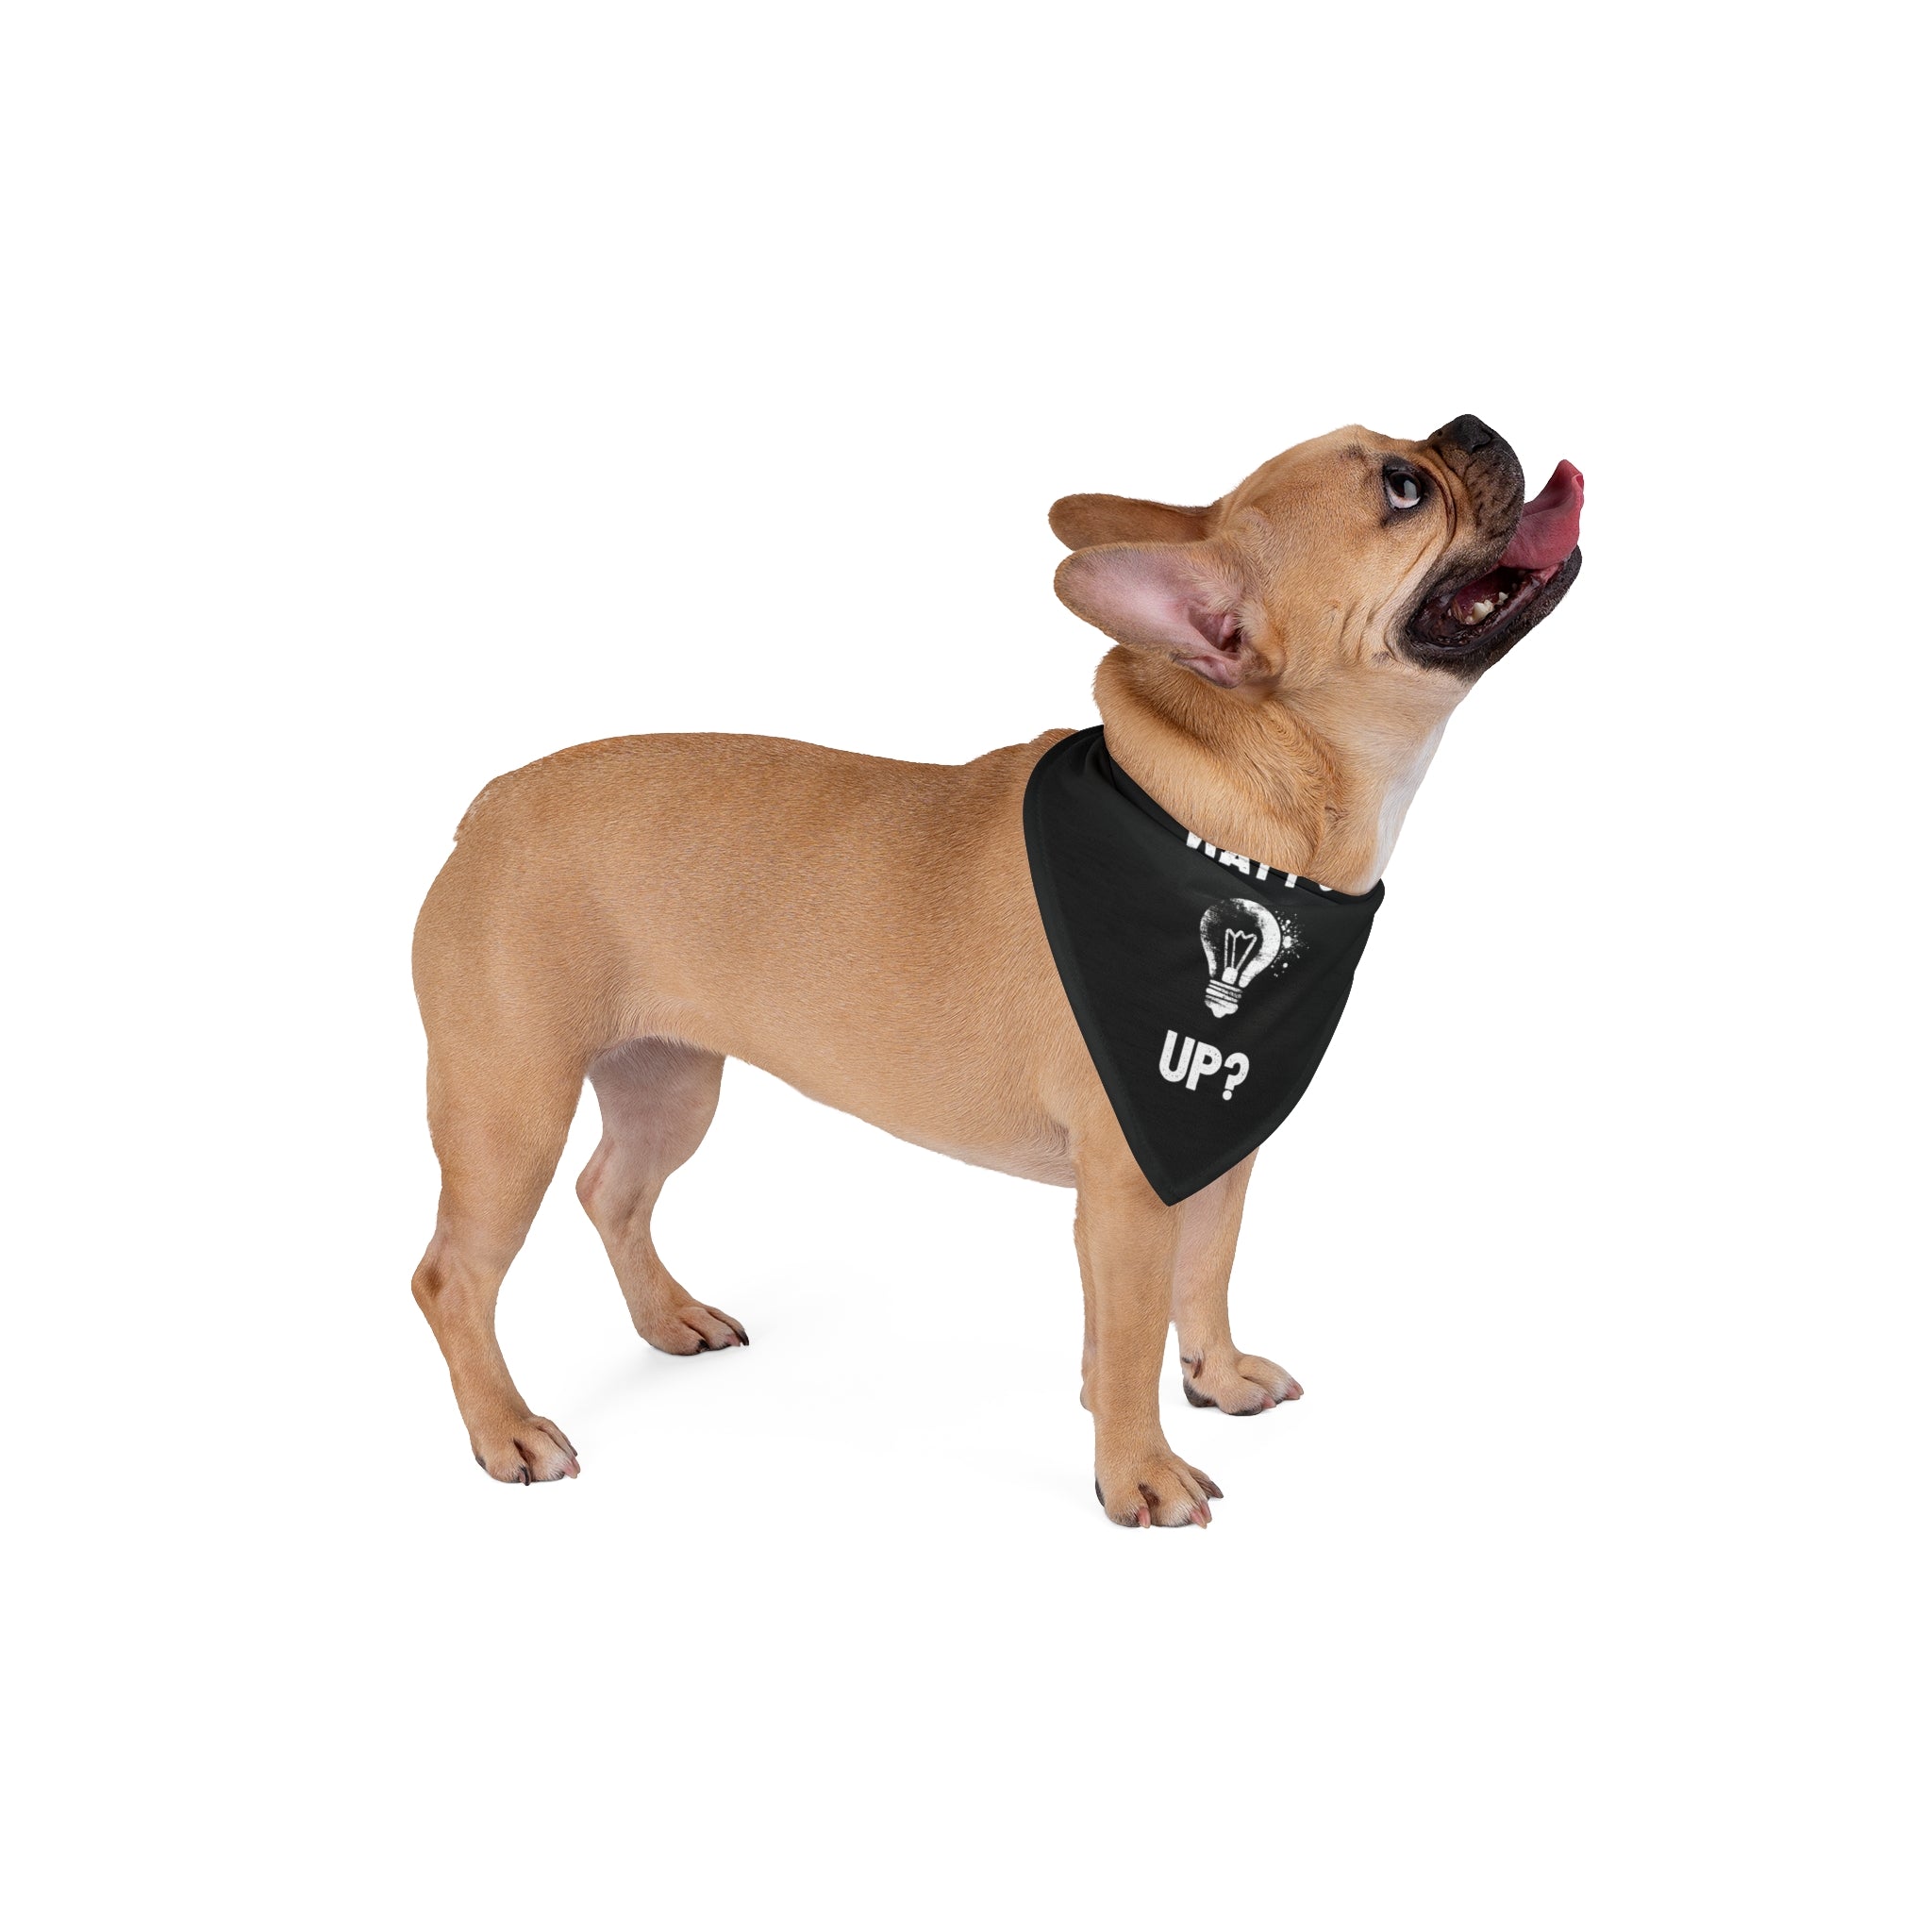 A small brown dog stands on a white background, wearing a Watts Up - Pet Bandana with the text "UP?" and looking upwards with its tongue out.